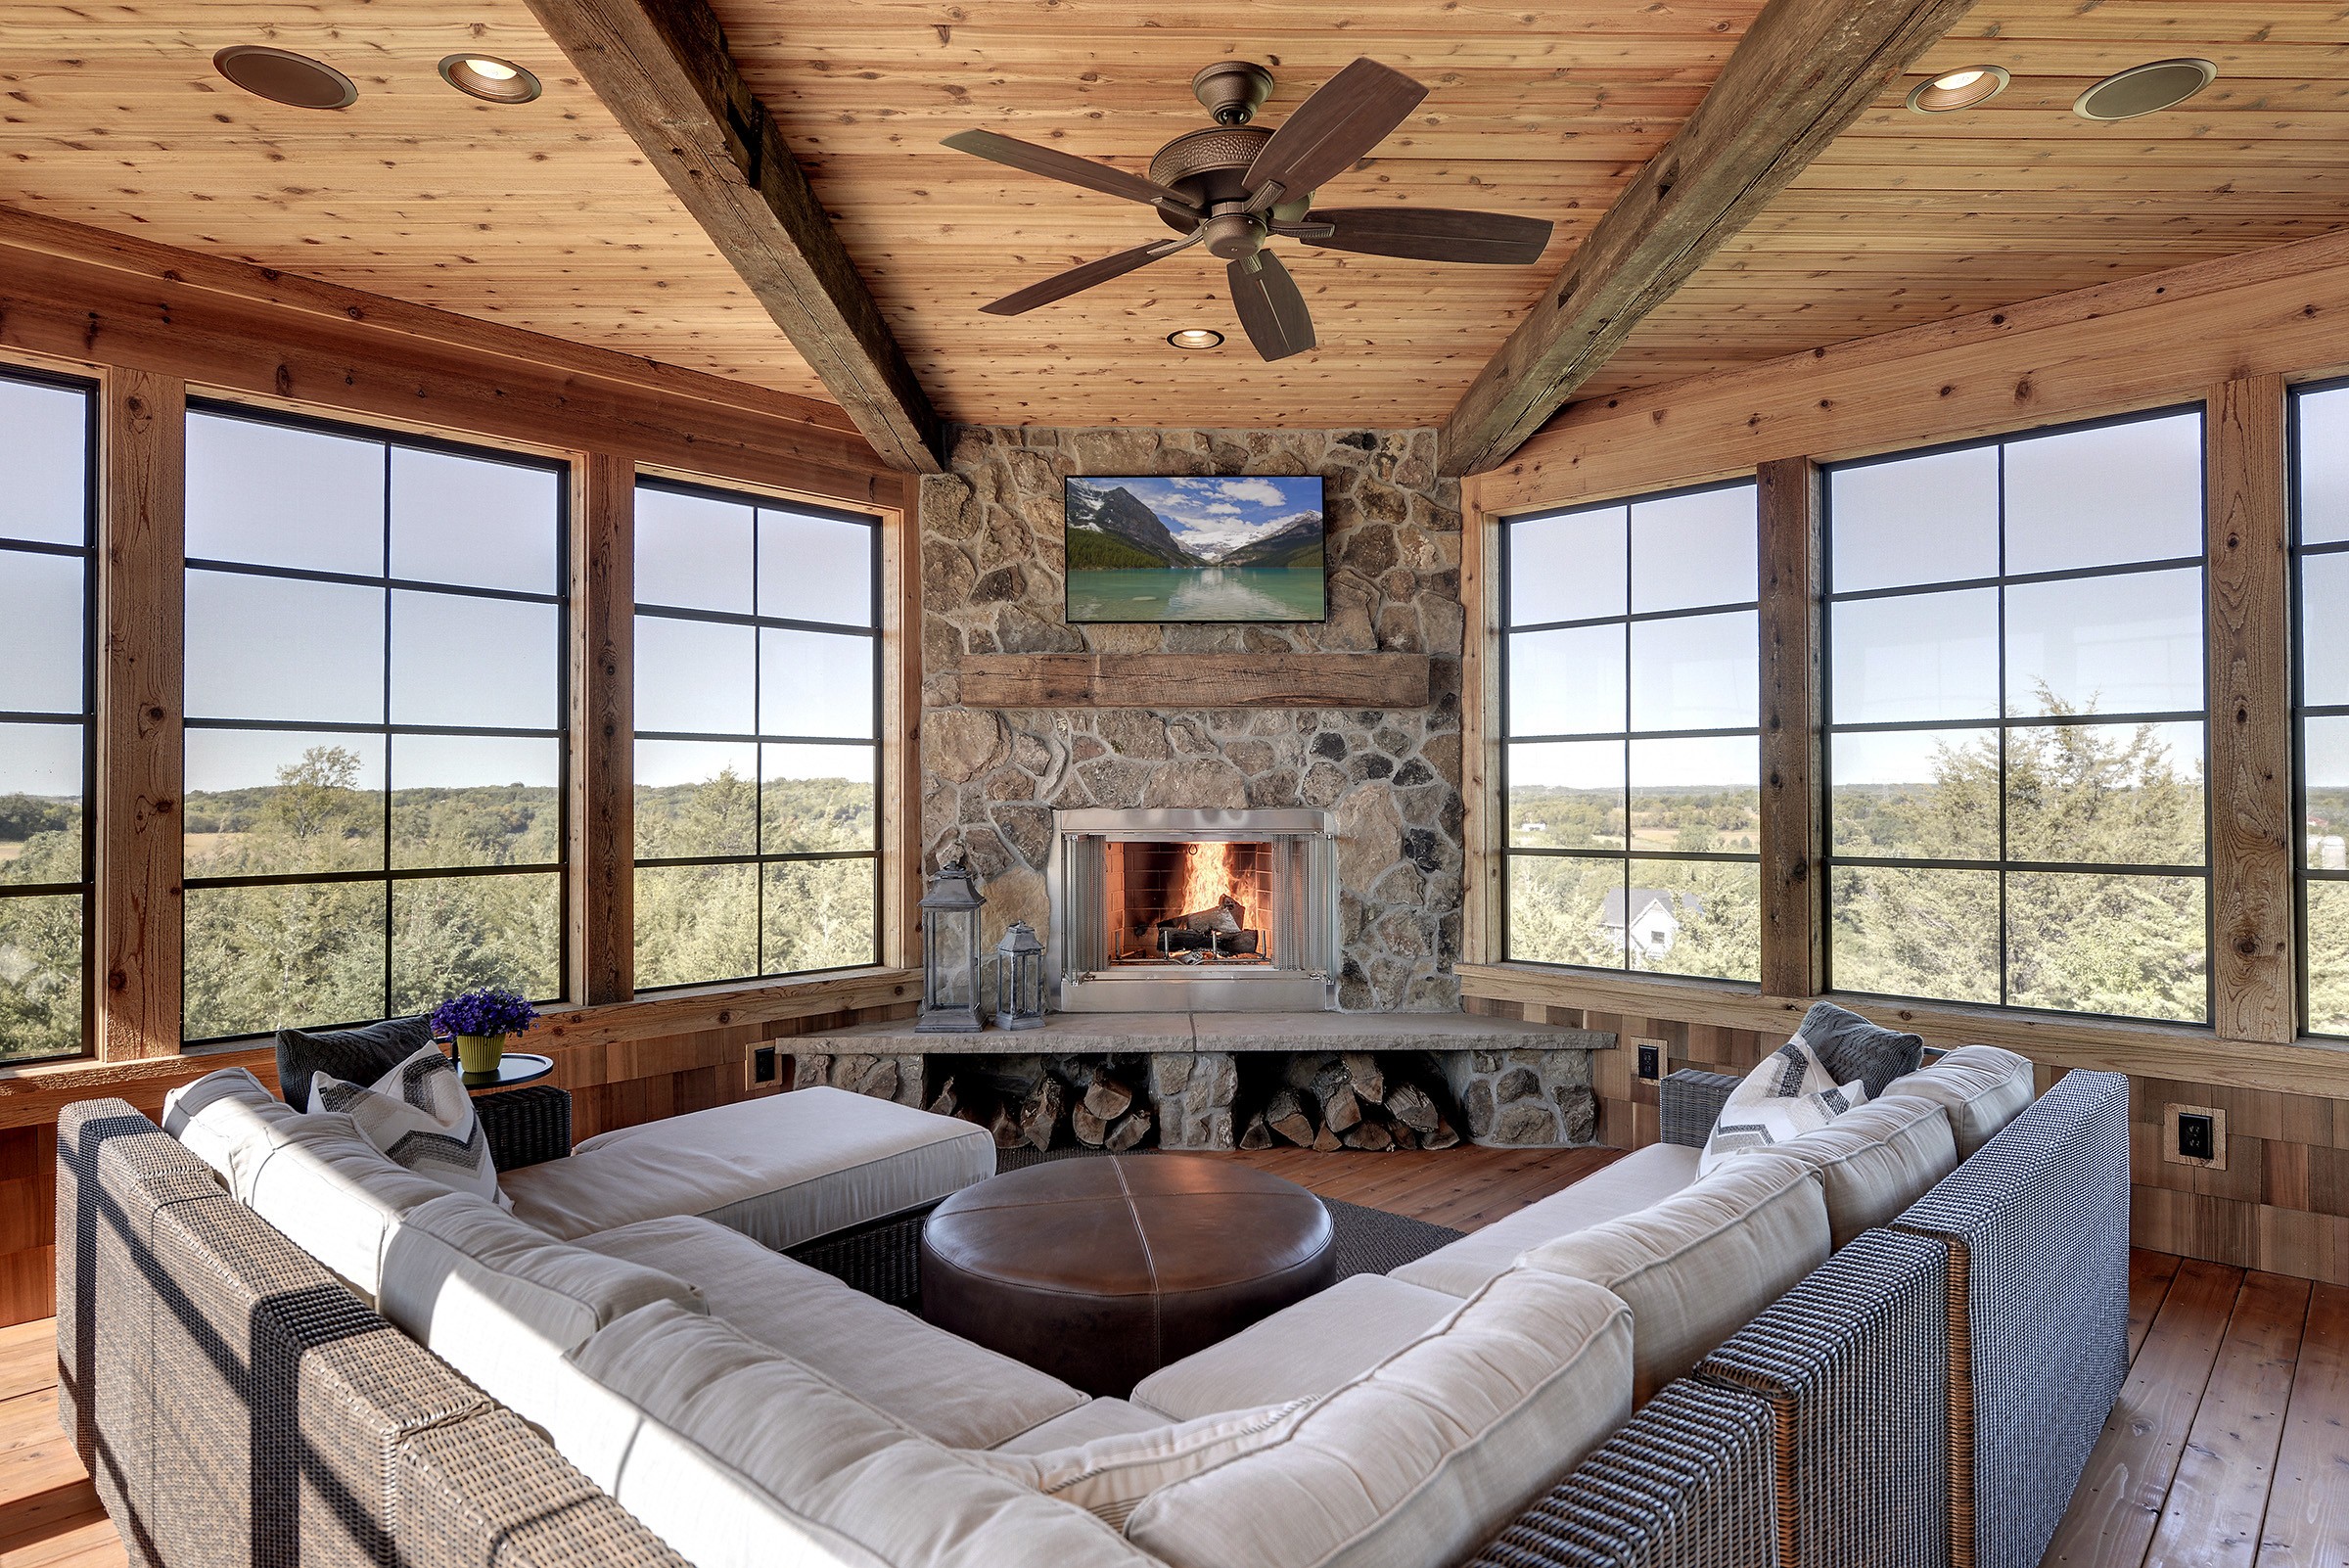 Xtend Porch Windows in cabin porch with knotty pine ceiling and stone fireplace